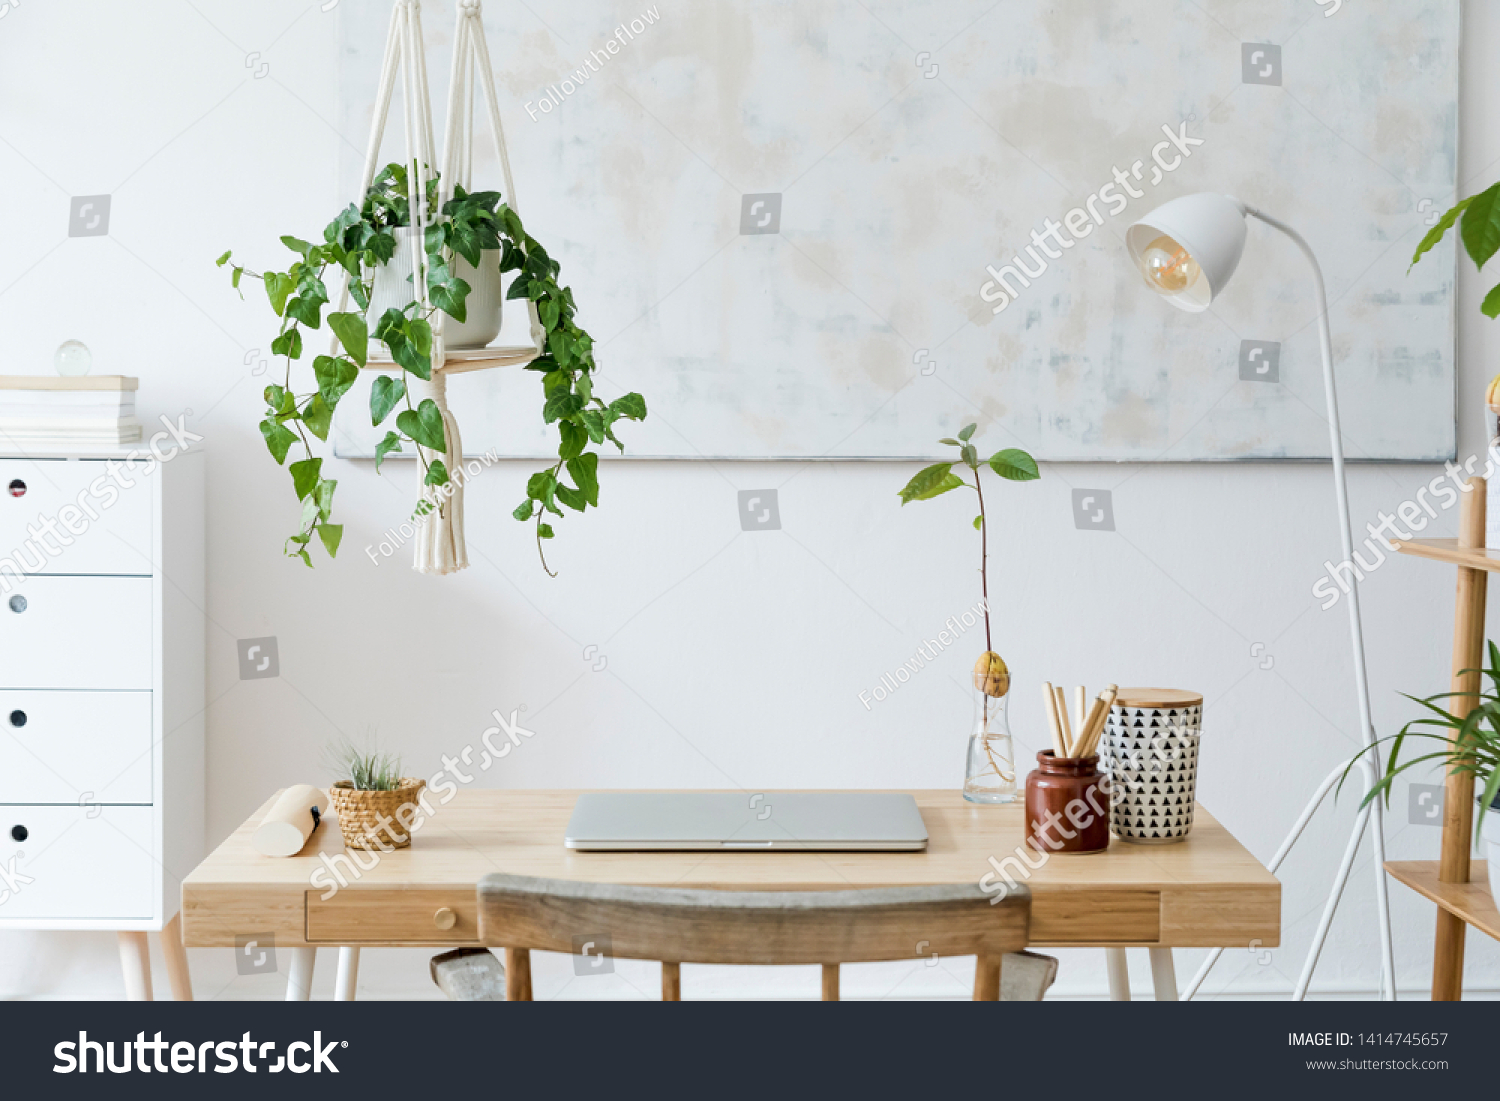 Stylish and boho home interior of open work space with wooden desk, chair, lamp, laptop and white shelf. Design and elegant personal accessories. Botany and minimalistic home decor with plants. #1414745657